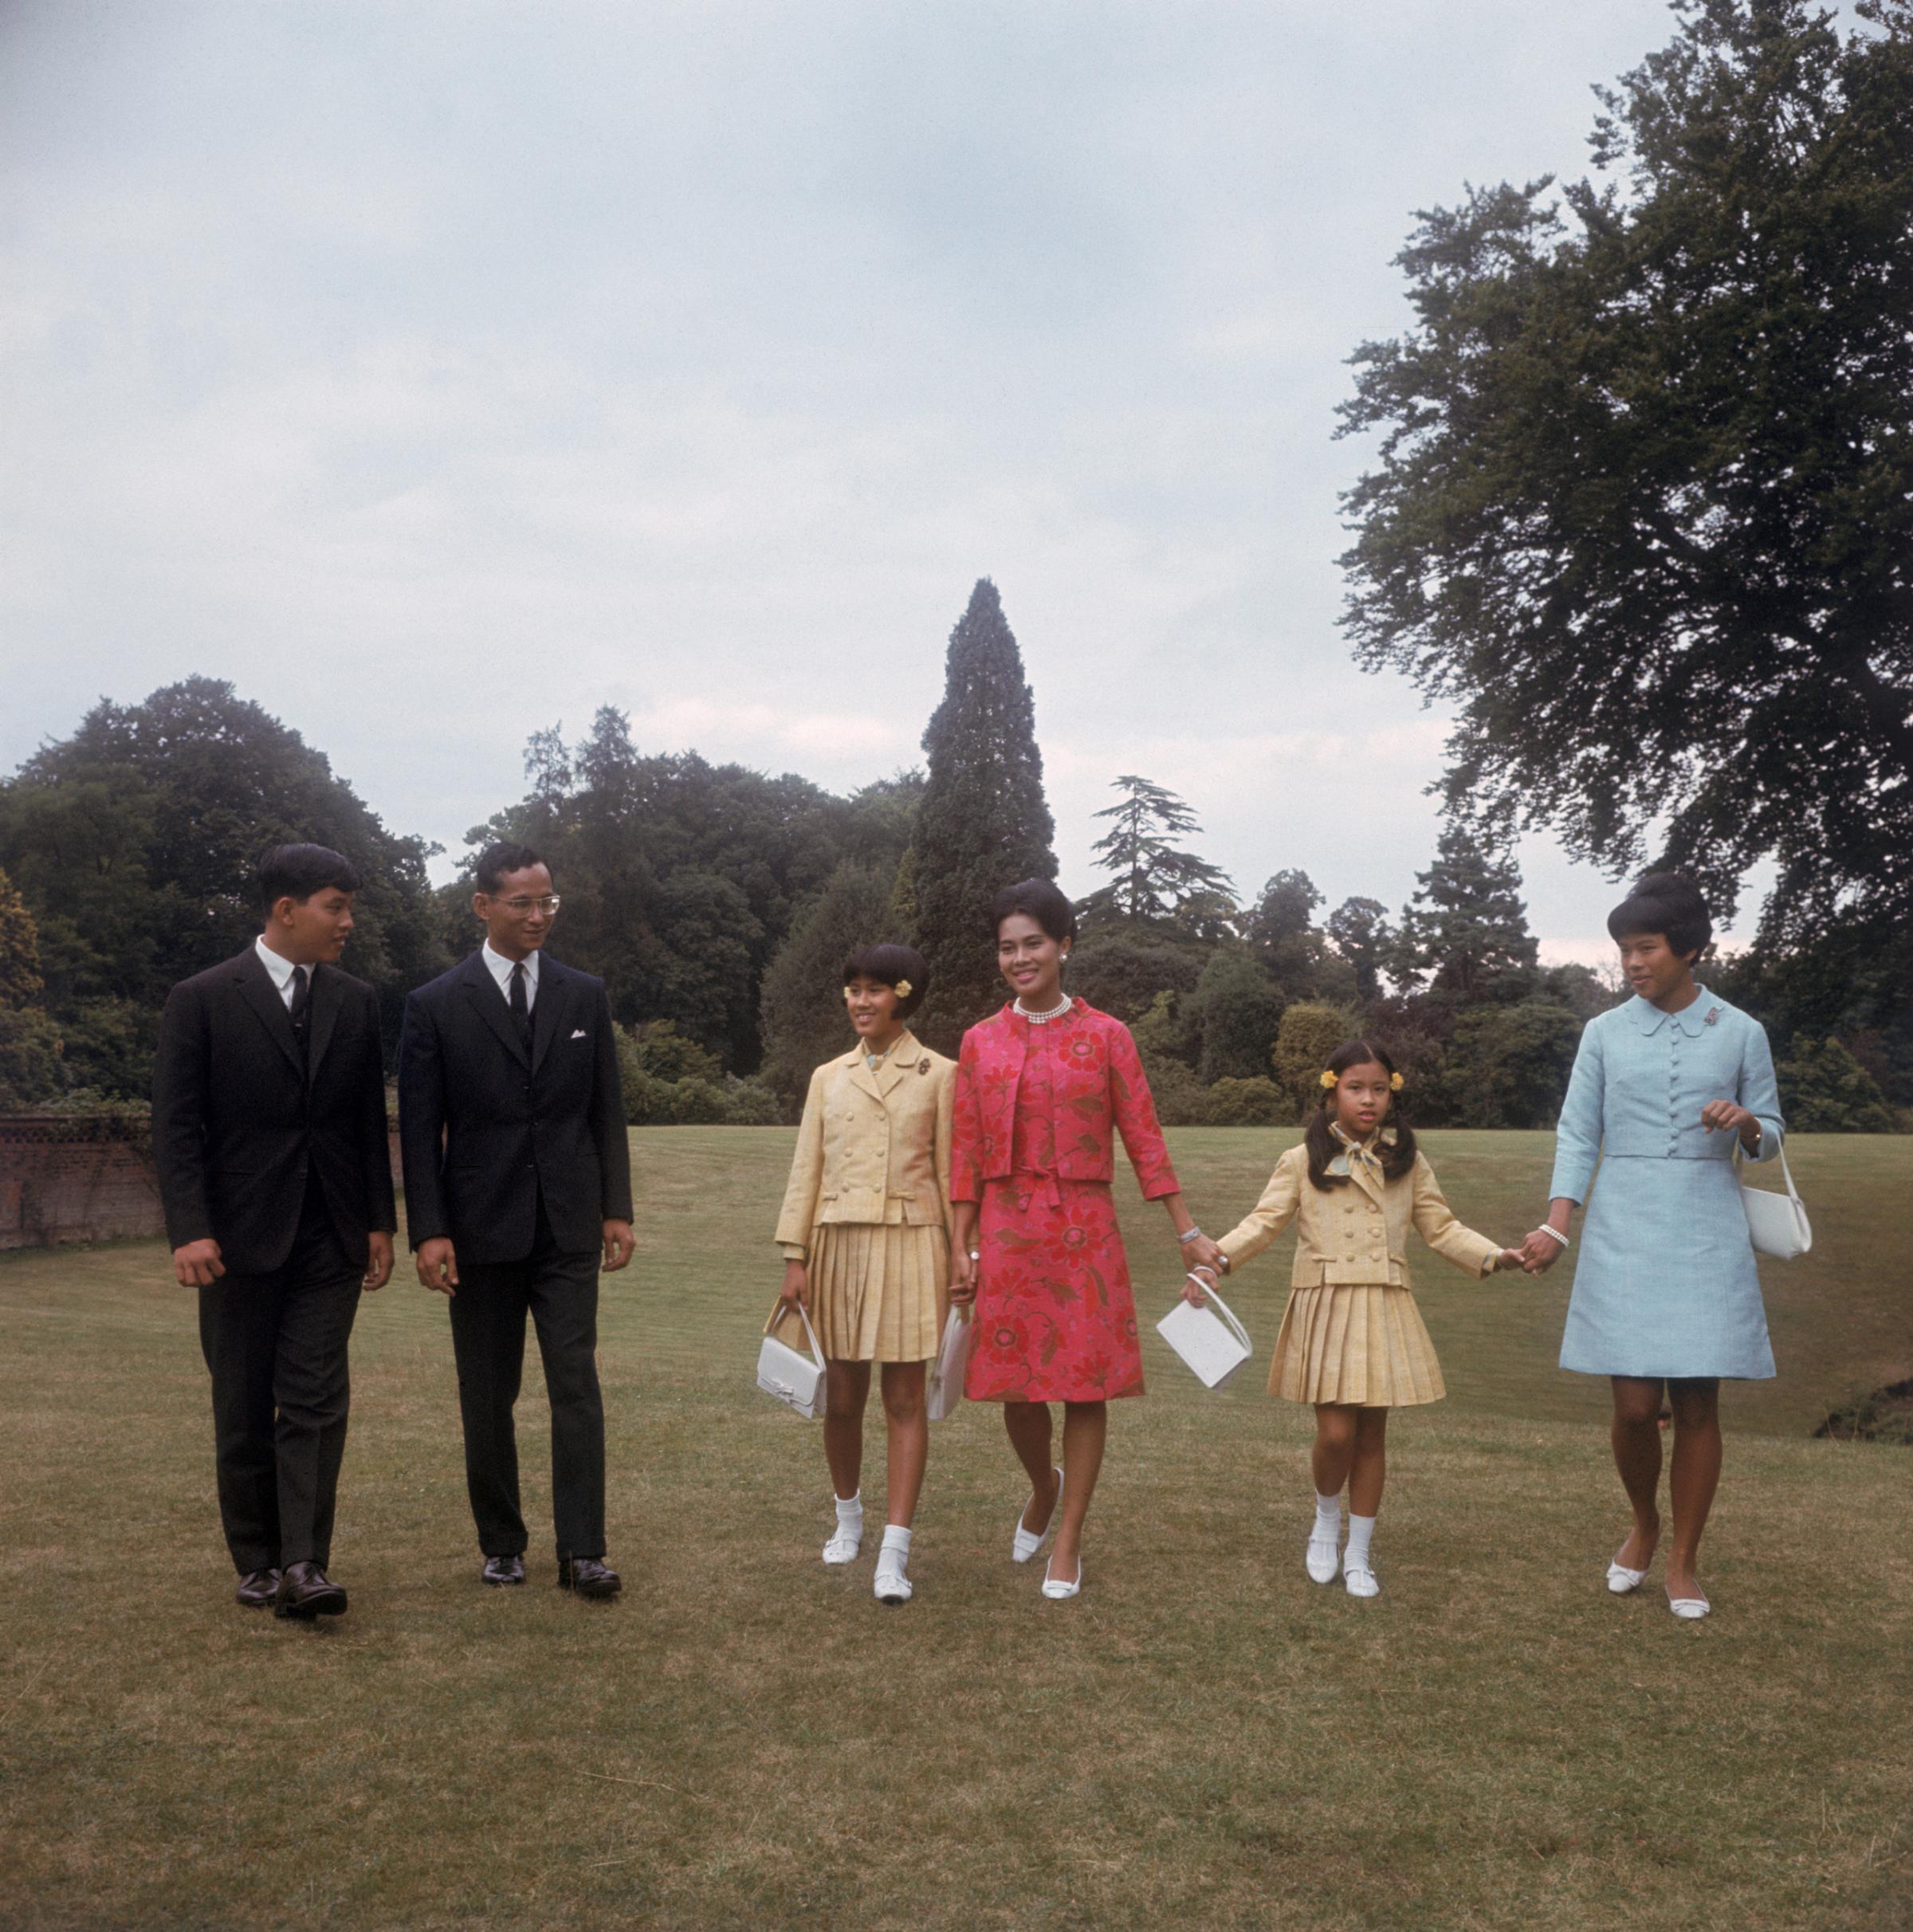 King Bhumibol Adulyadej and Queen Sirikit with their children at King's Beeches, their private residence in Sunninghill, Berkshire, July 27, 1966.